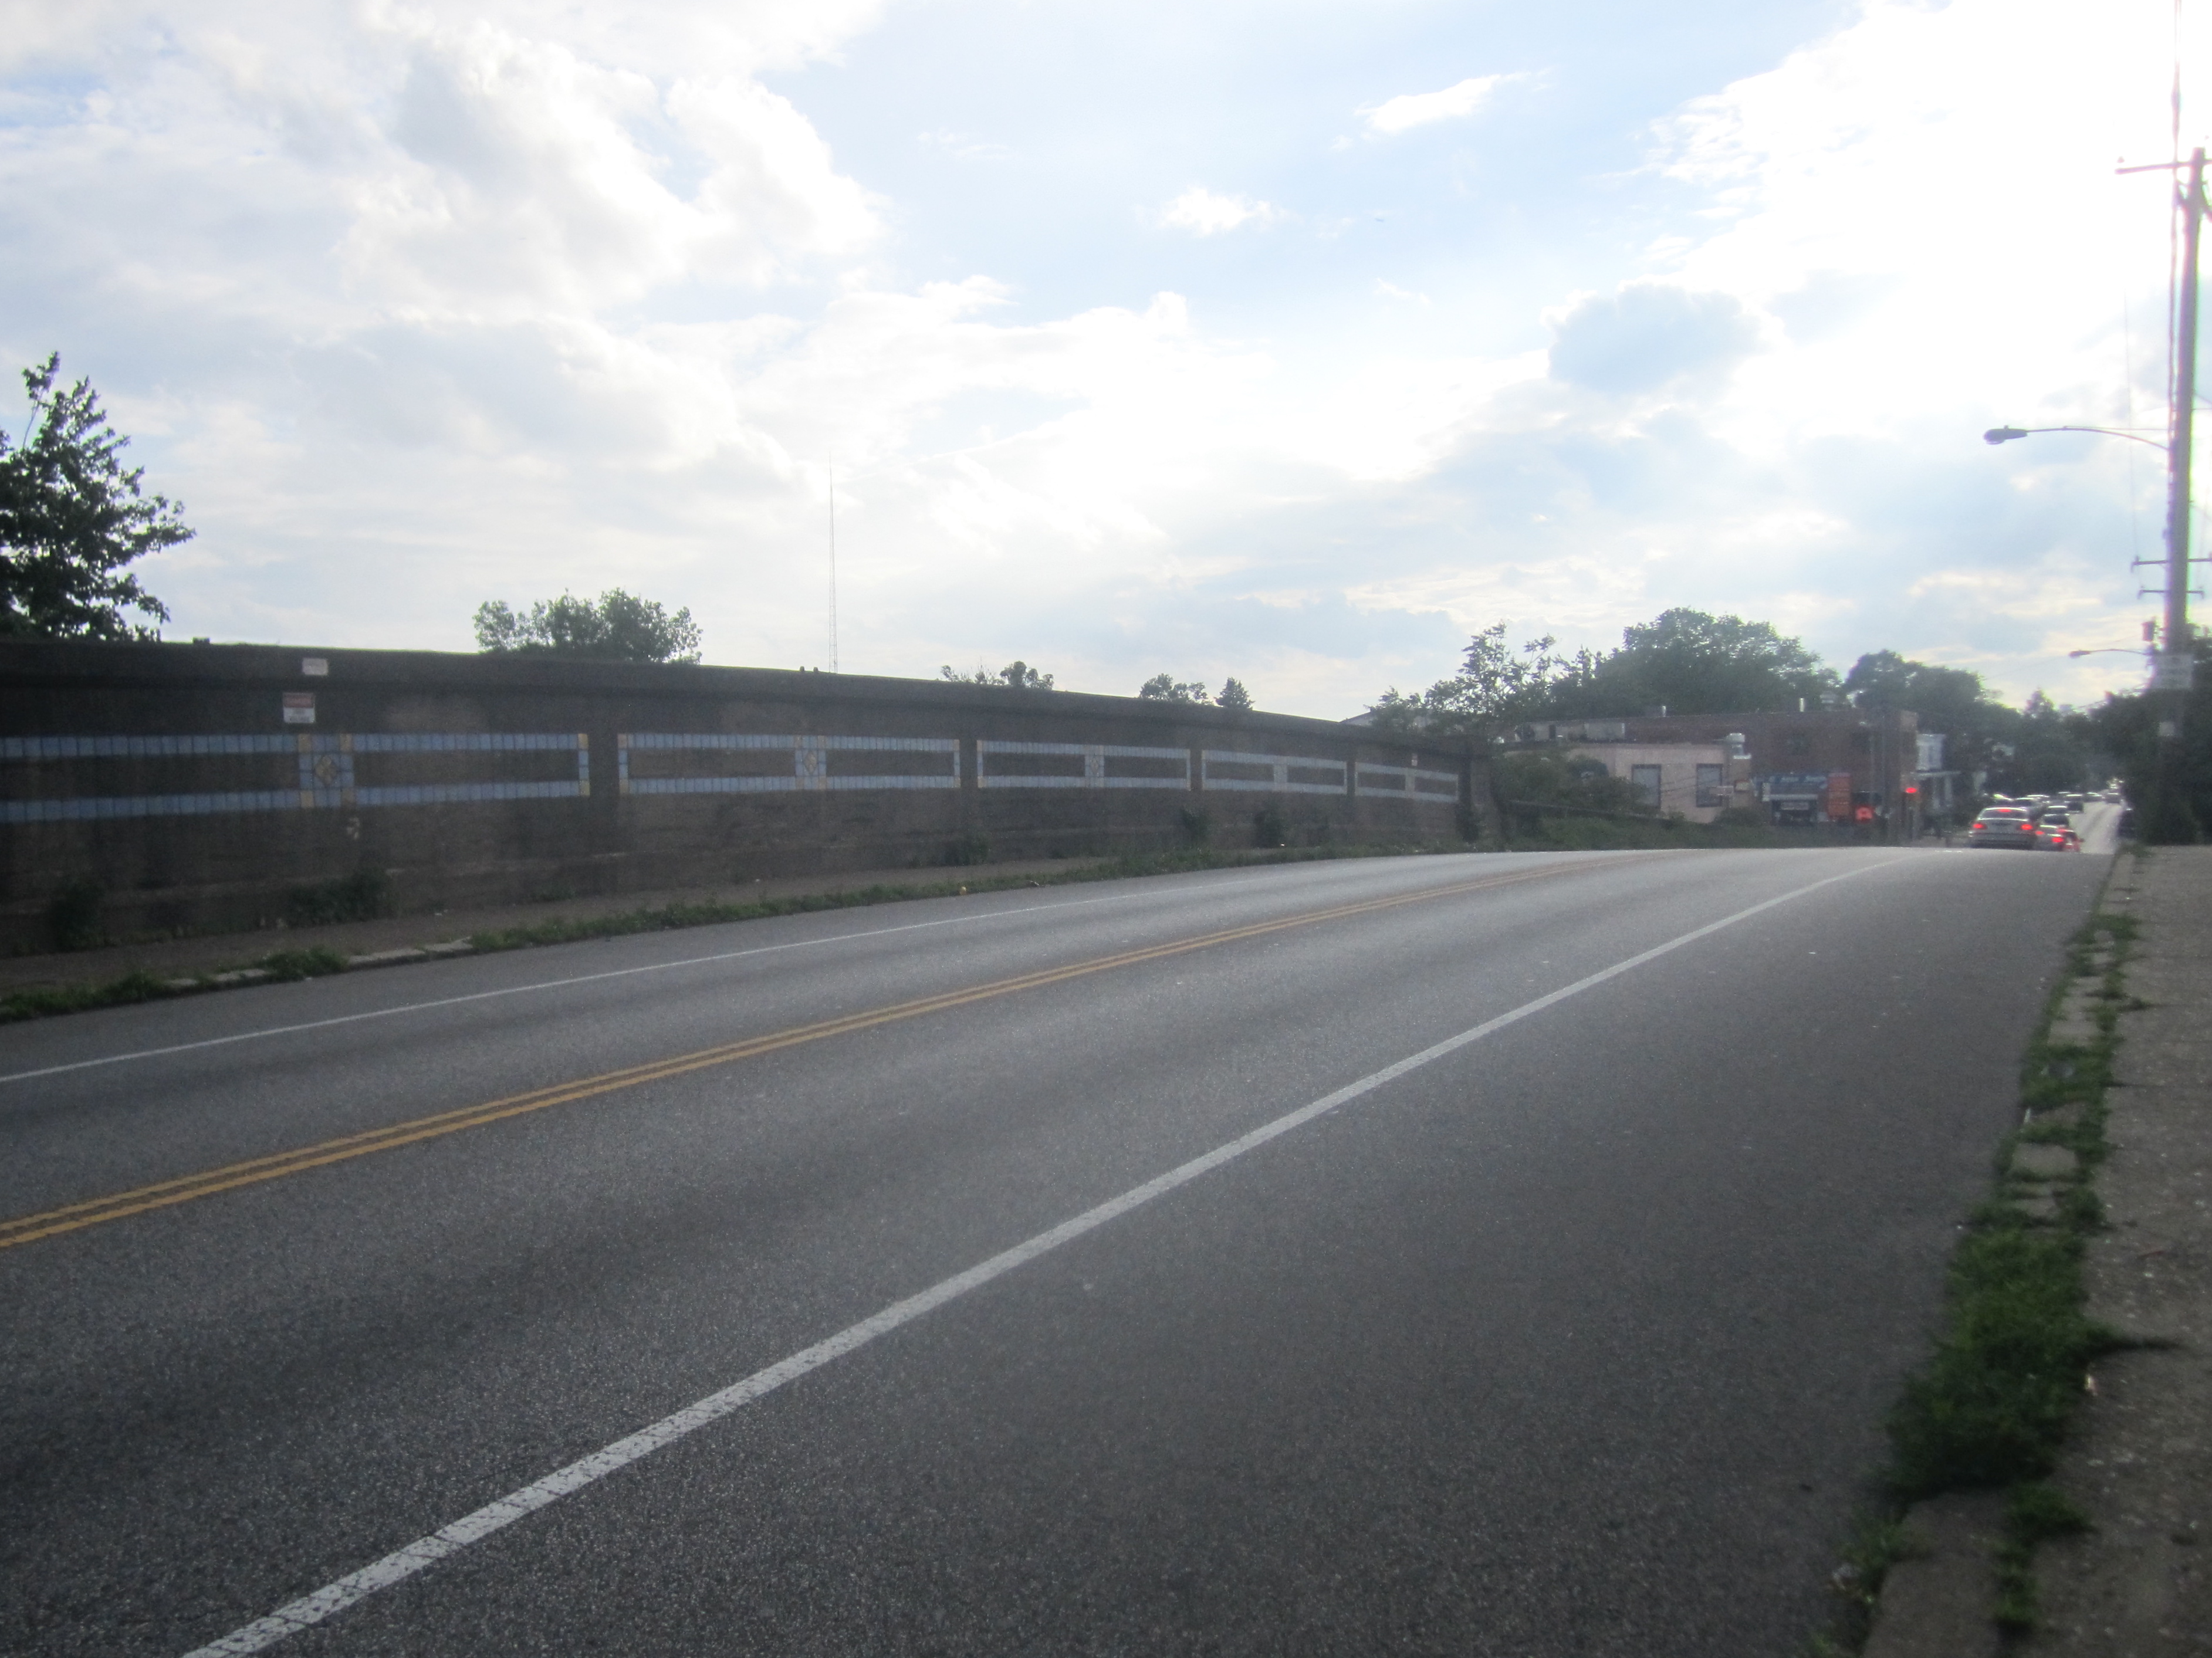 PennDOT will install a raised median to slow traffic over the bridge between Front and B streets